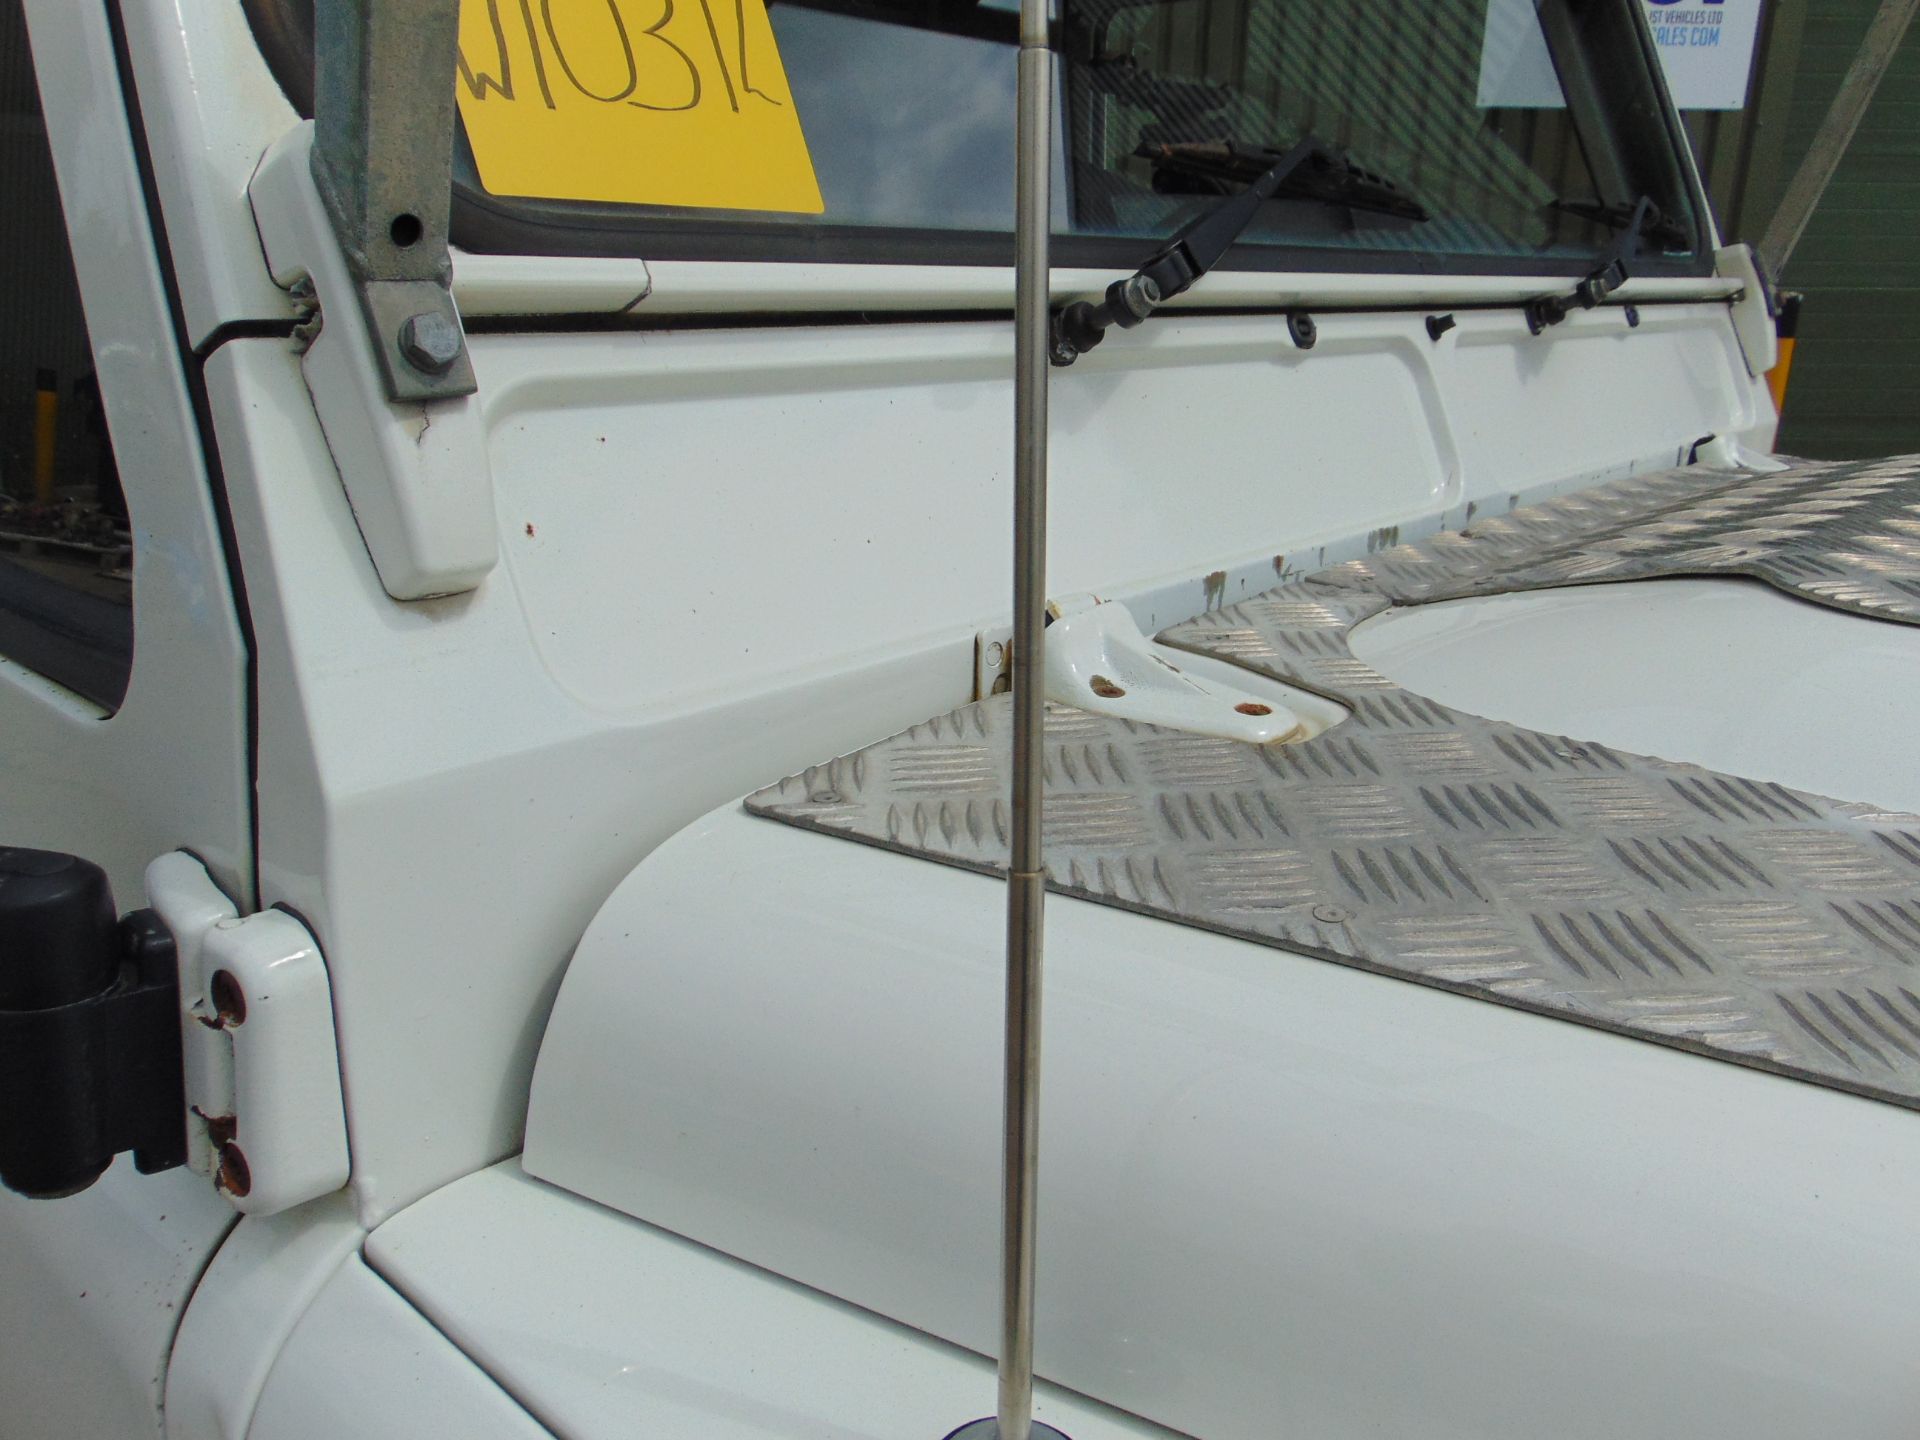 2007 Land Rover Defender 110 Puma hardtop 4x4 Utility vehicle (mobile workshop) with hydraulic winch - Image 10 of 31